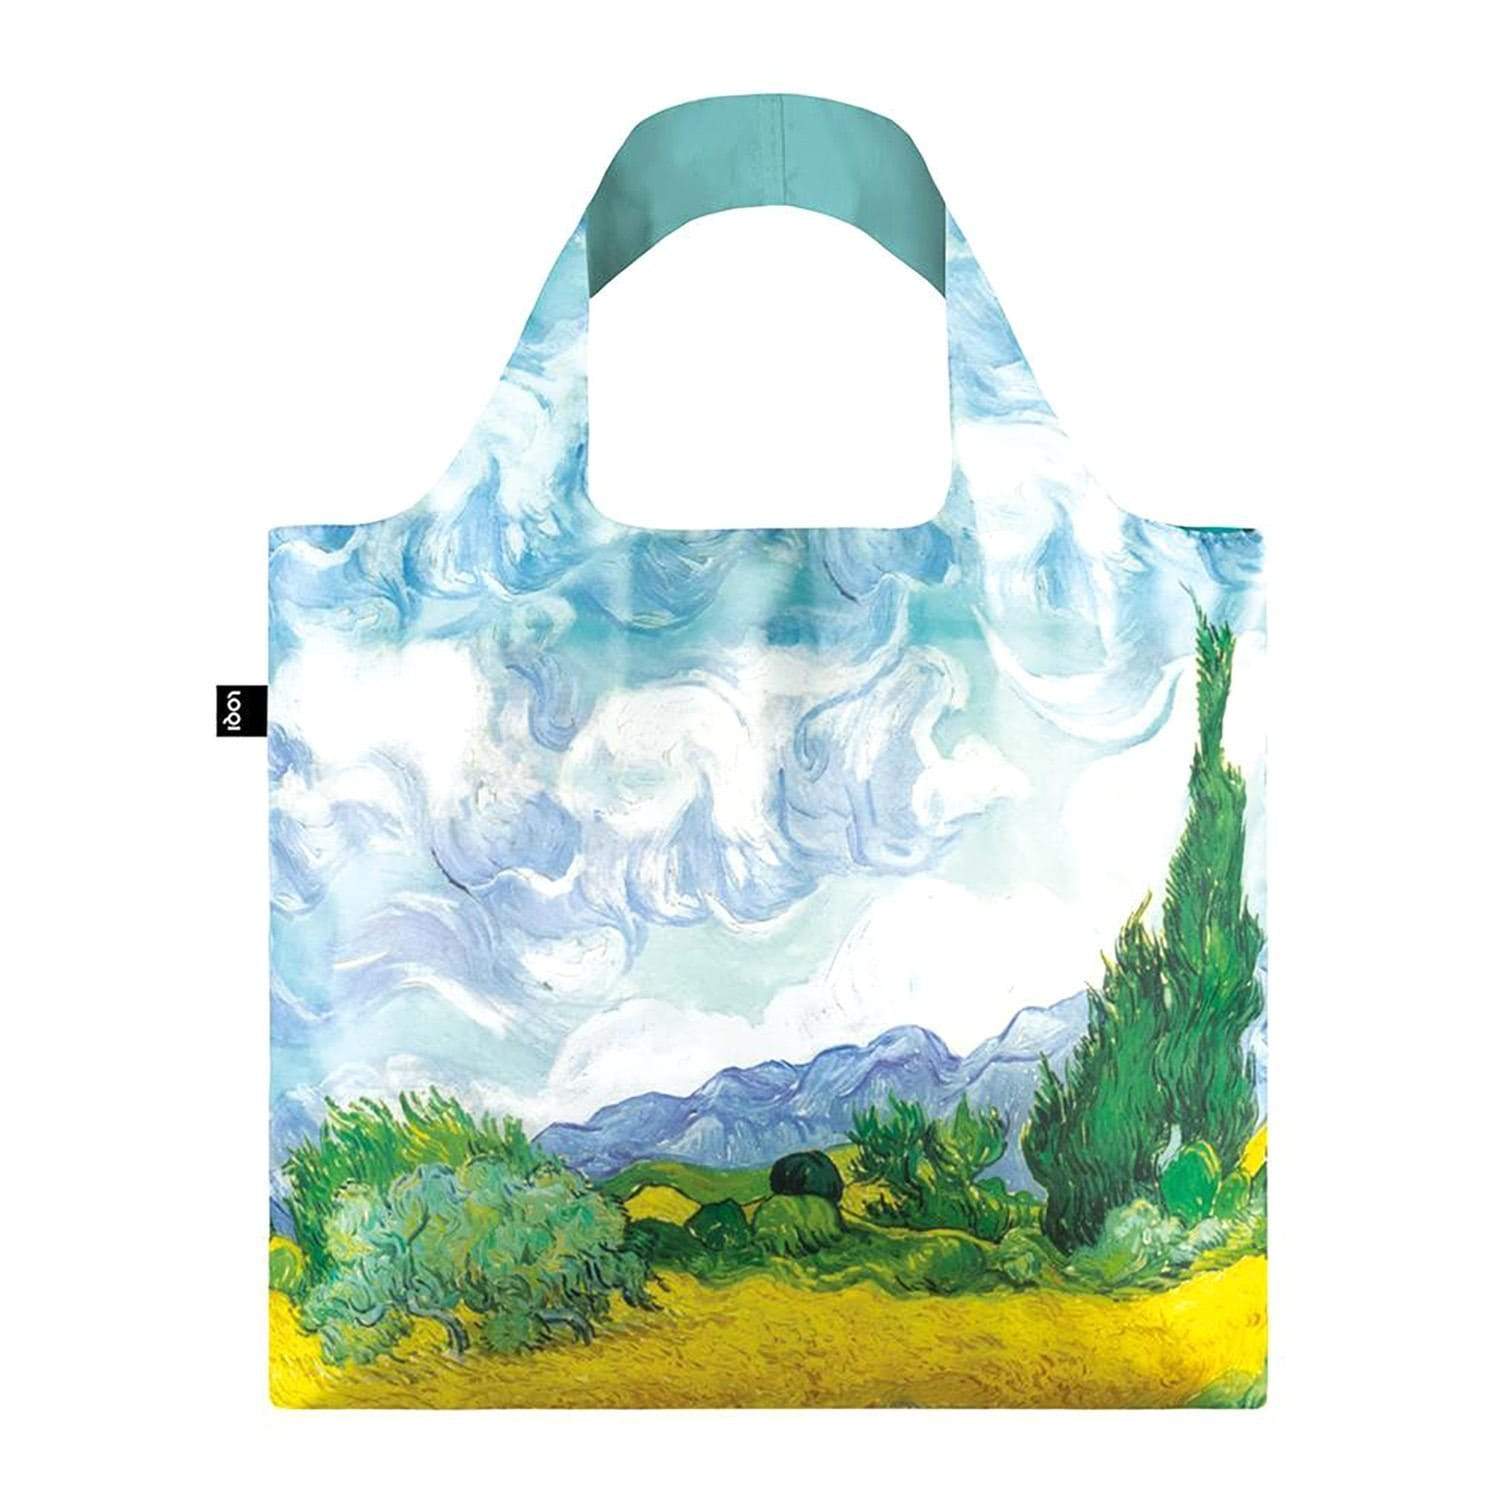 Loqi Museum Vincent Van Gogh's a Wheat Field with Cypresses Tote Bag - VG.WH.N - Jashanmal Home